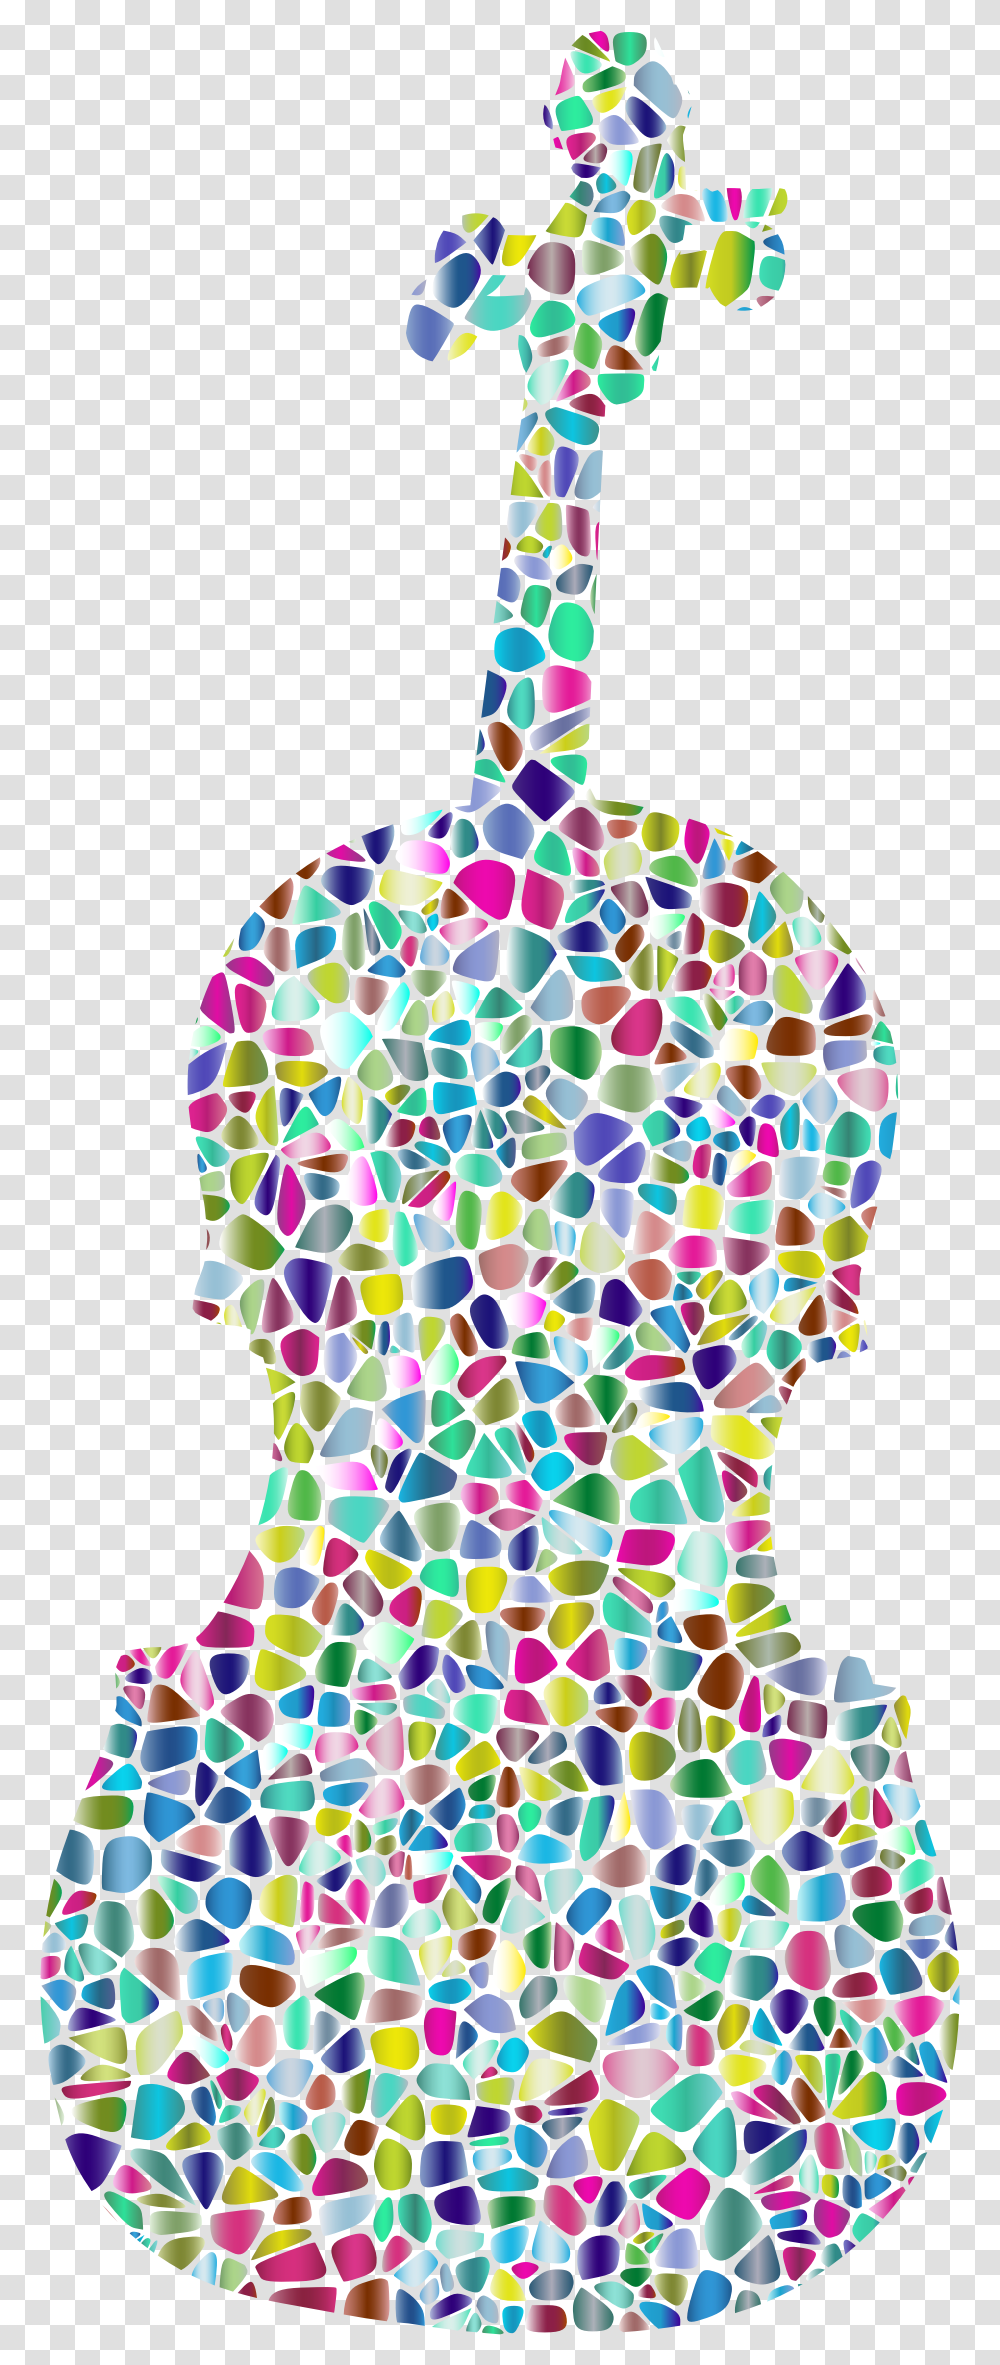 Polyprismatic Tiled Violin Silhouette Clip Arts Violin, Stained Glass, Pattern, Mosaic Transparent Png